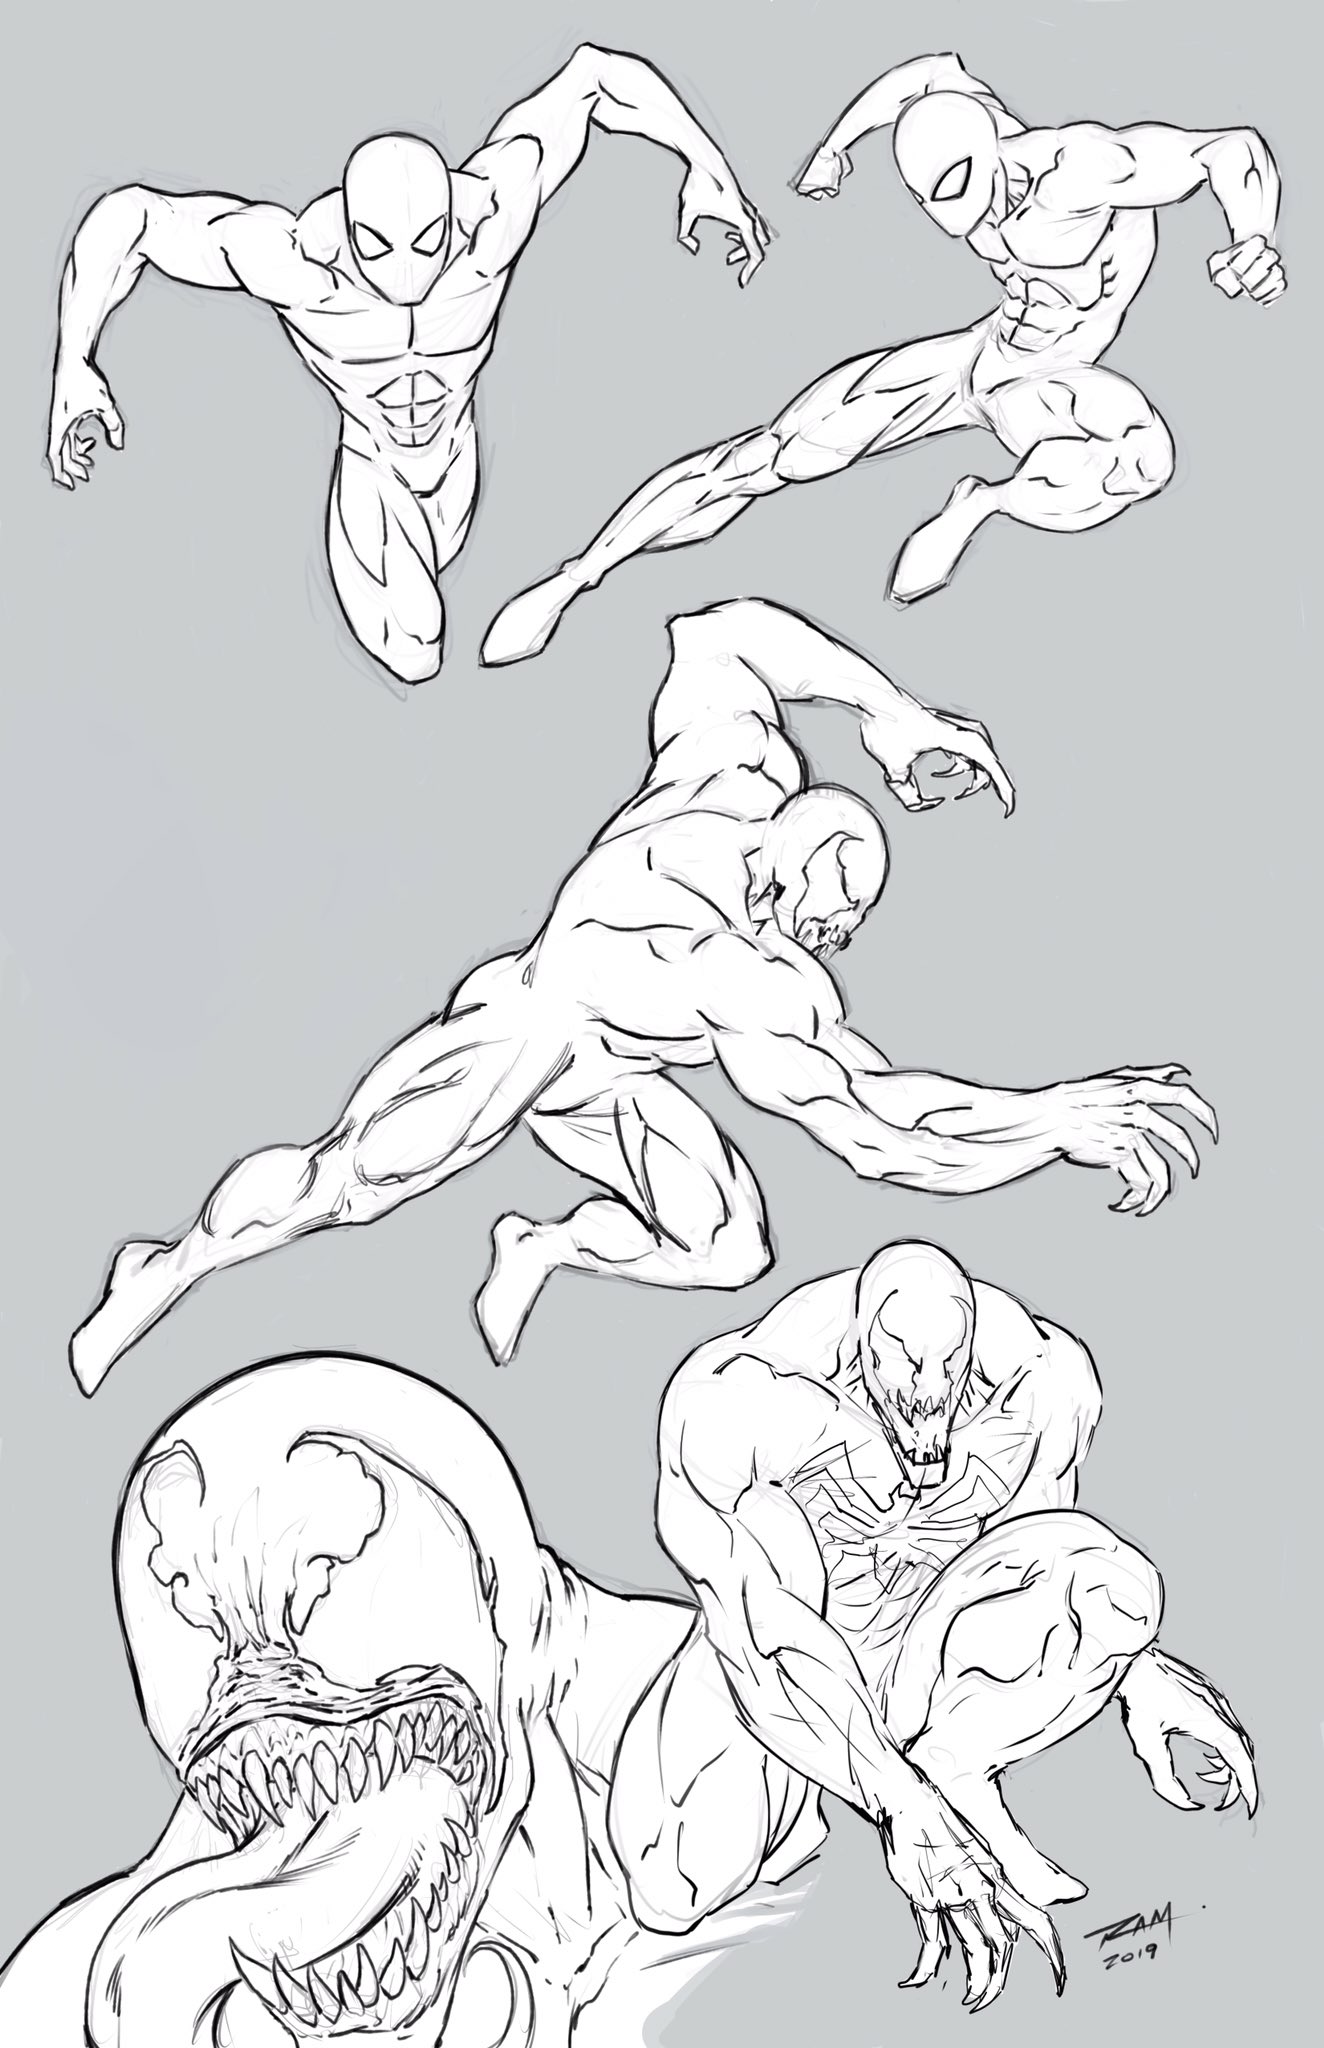 Secret to drawing Spider-Man: give him dynamic action poses | MLTSHP